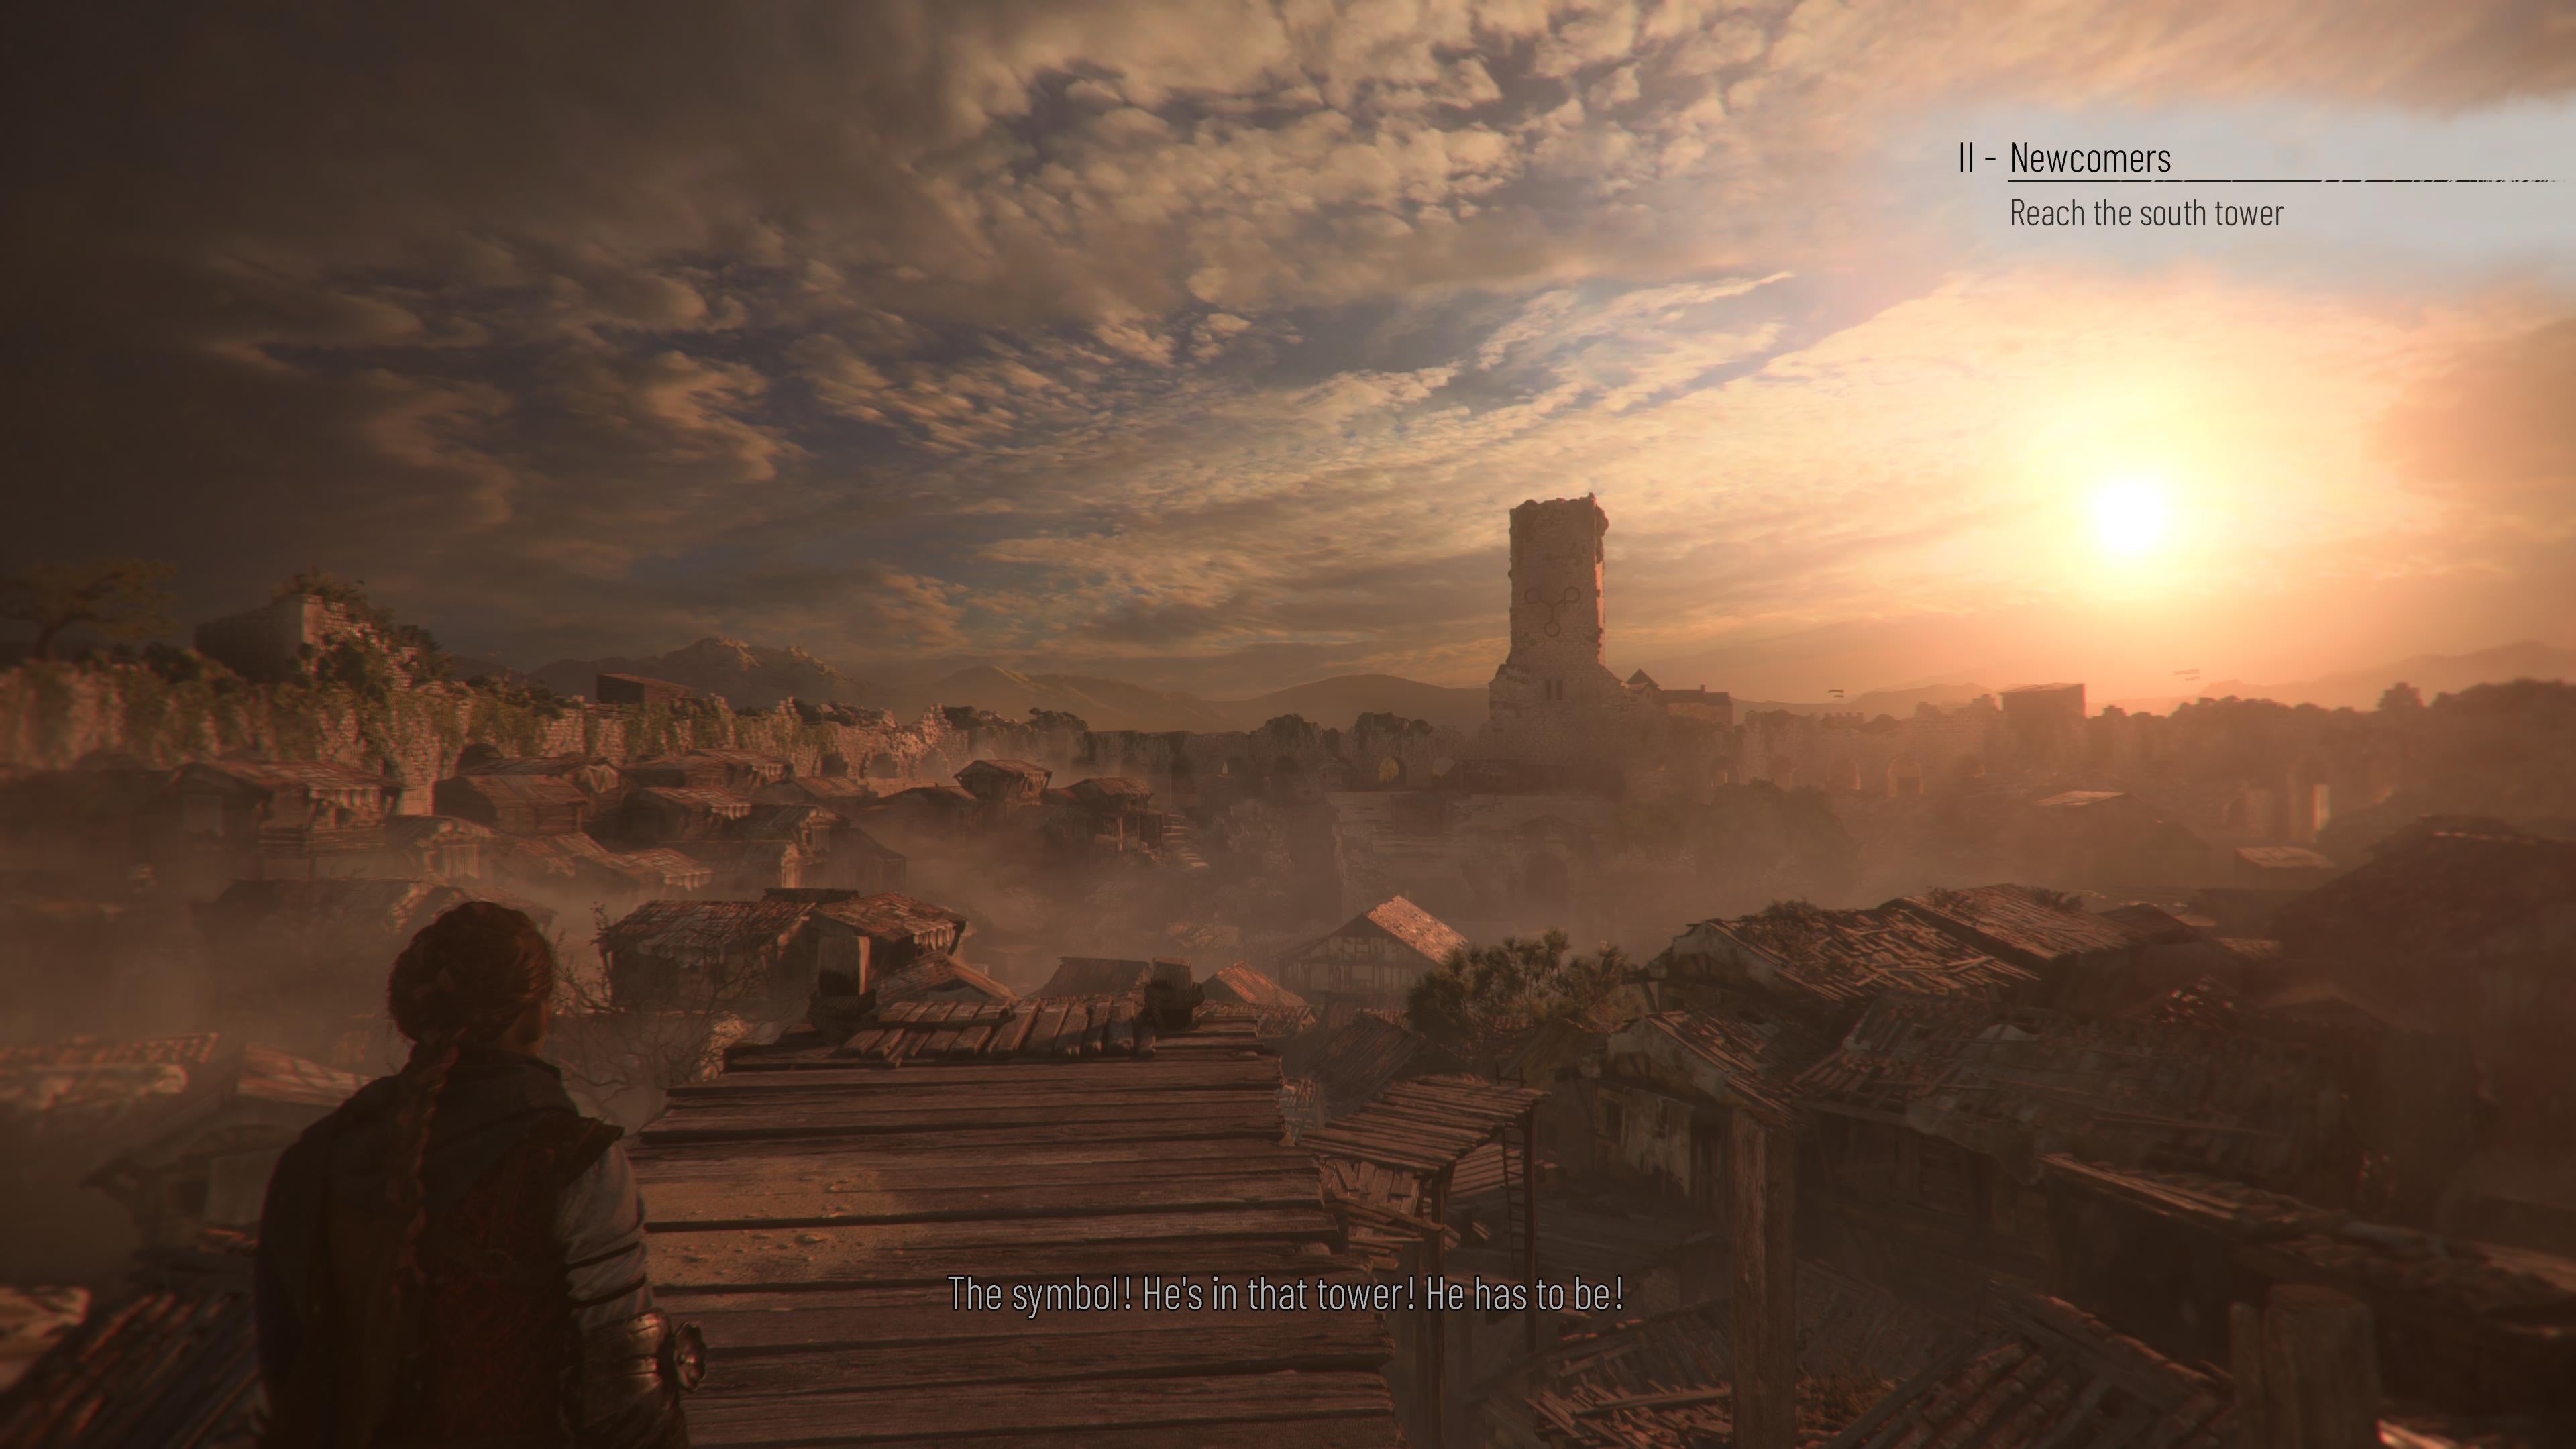 An evening shot of a city in 14th century France, all dusty and lit by a large glowing sun.